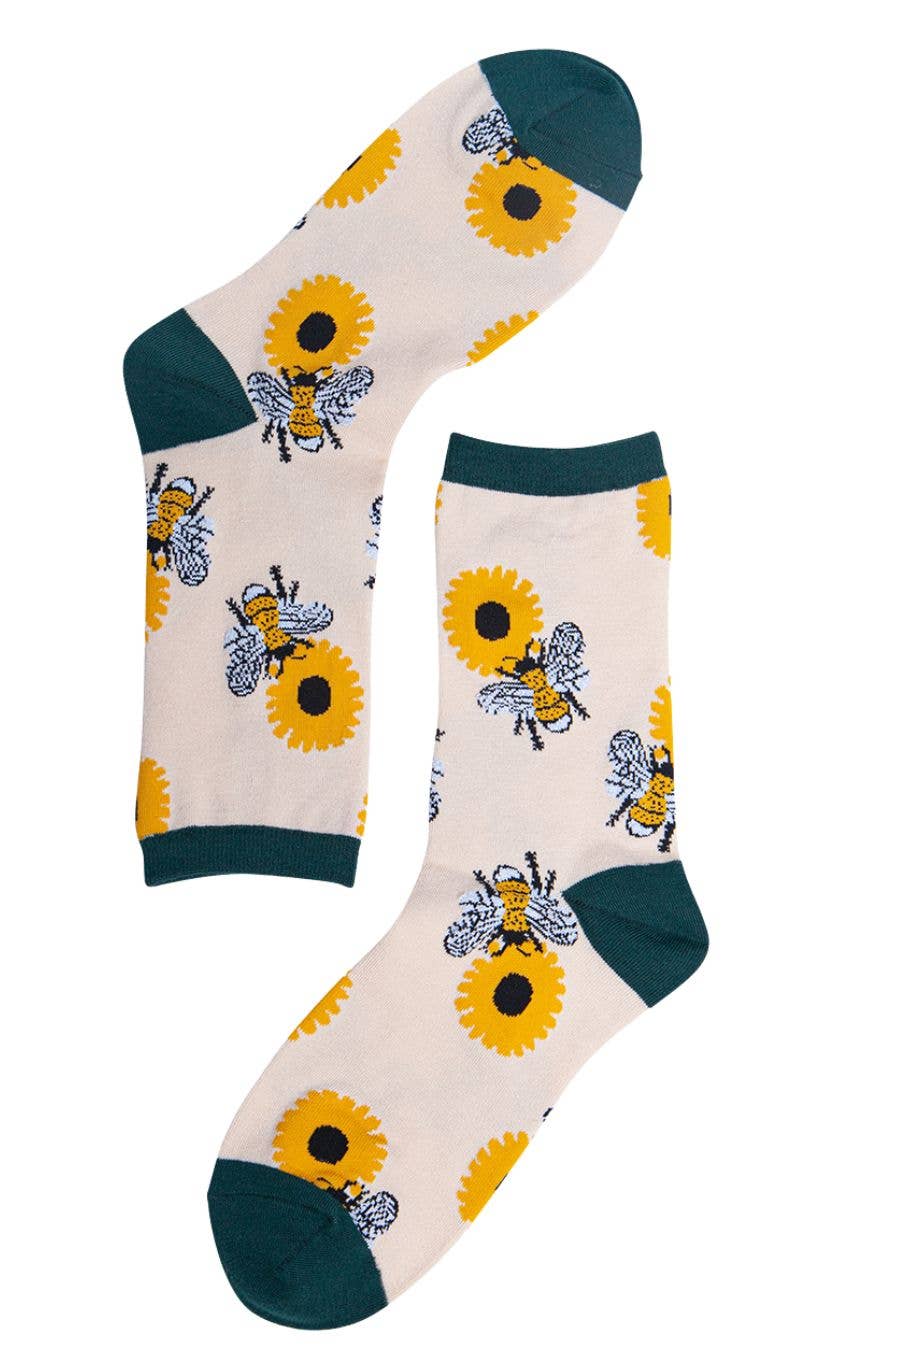 Sock Talk - Womens Bamboo Bee Socks Bumblebees Sunflowers Floral Ankle